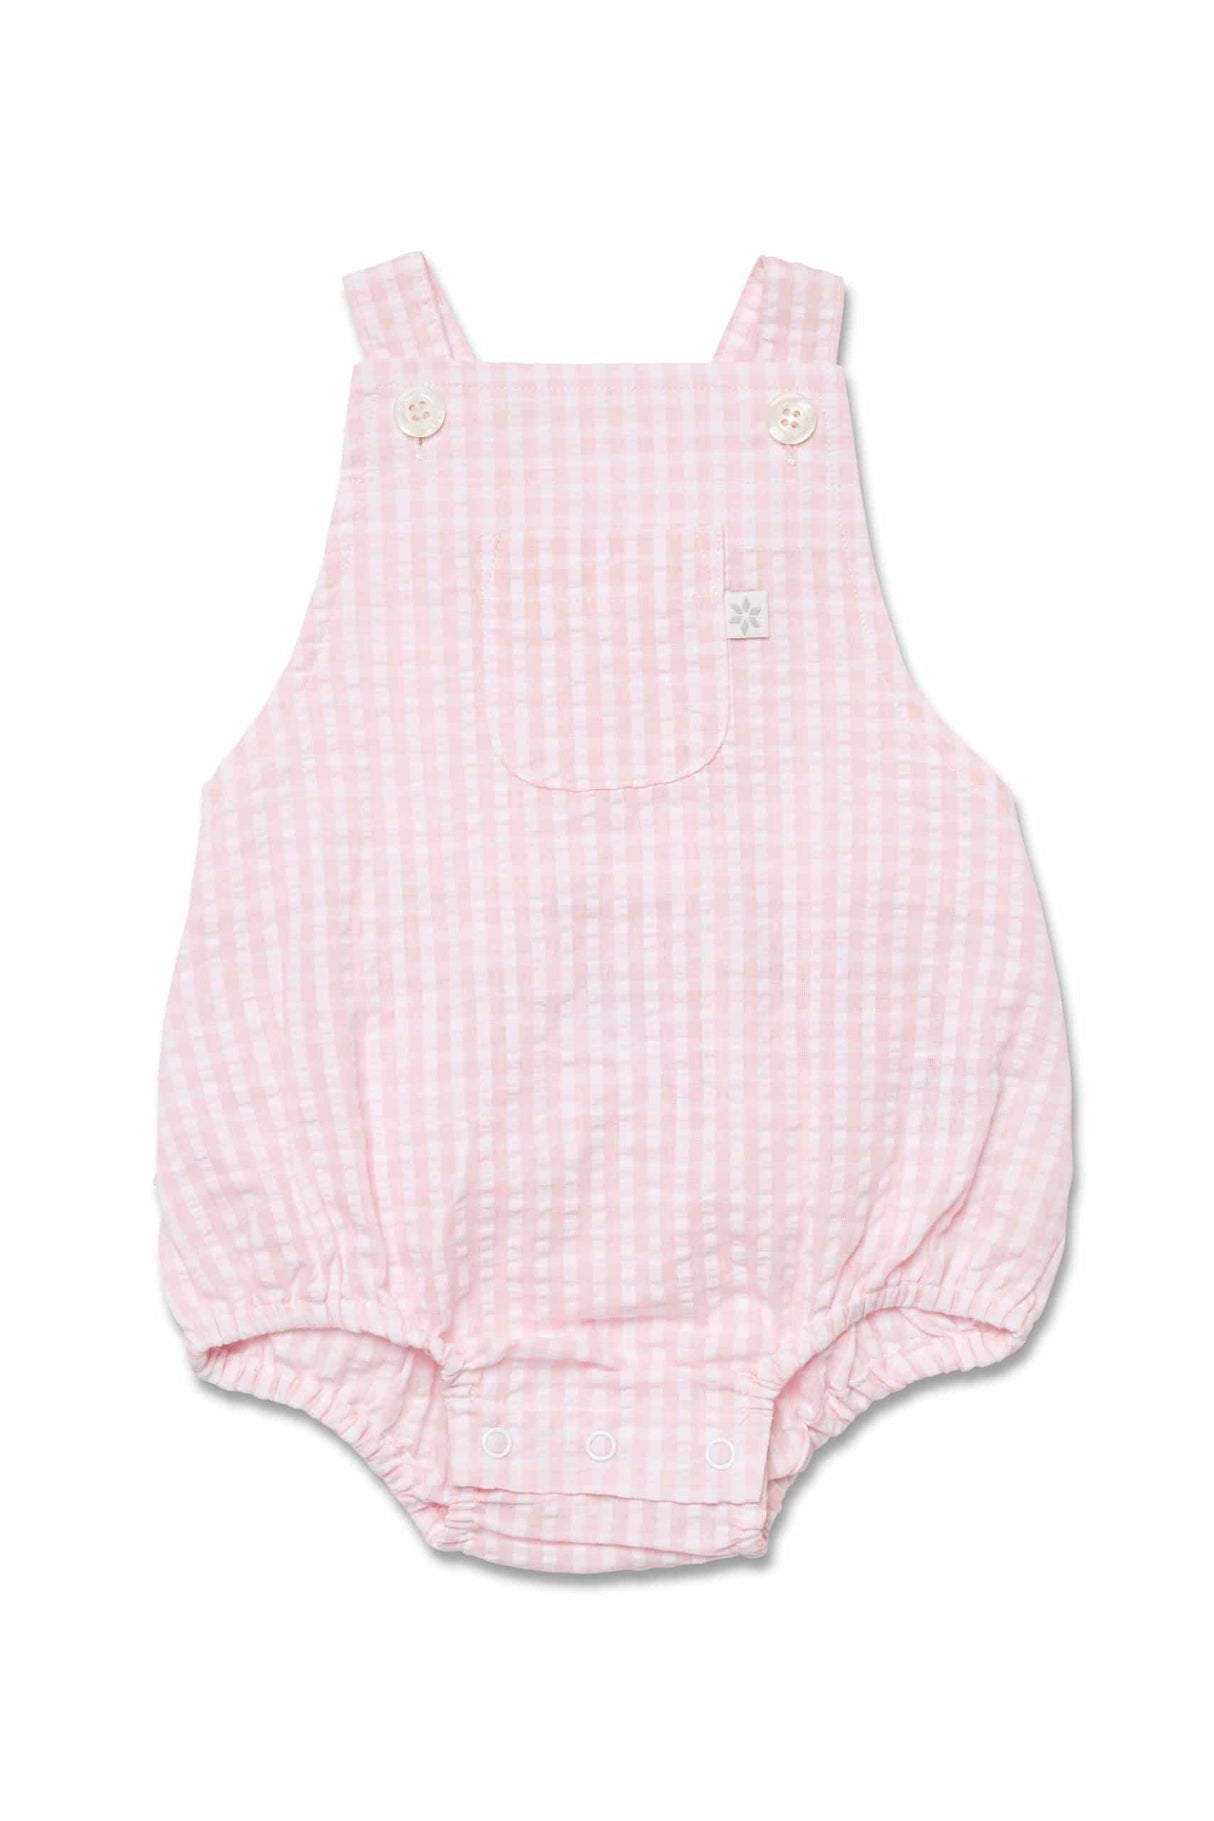 Marquise Pink Frilled Gingham Romper